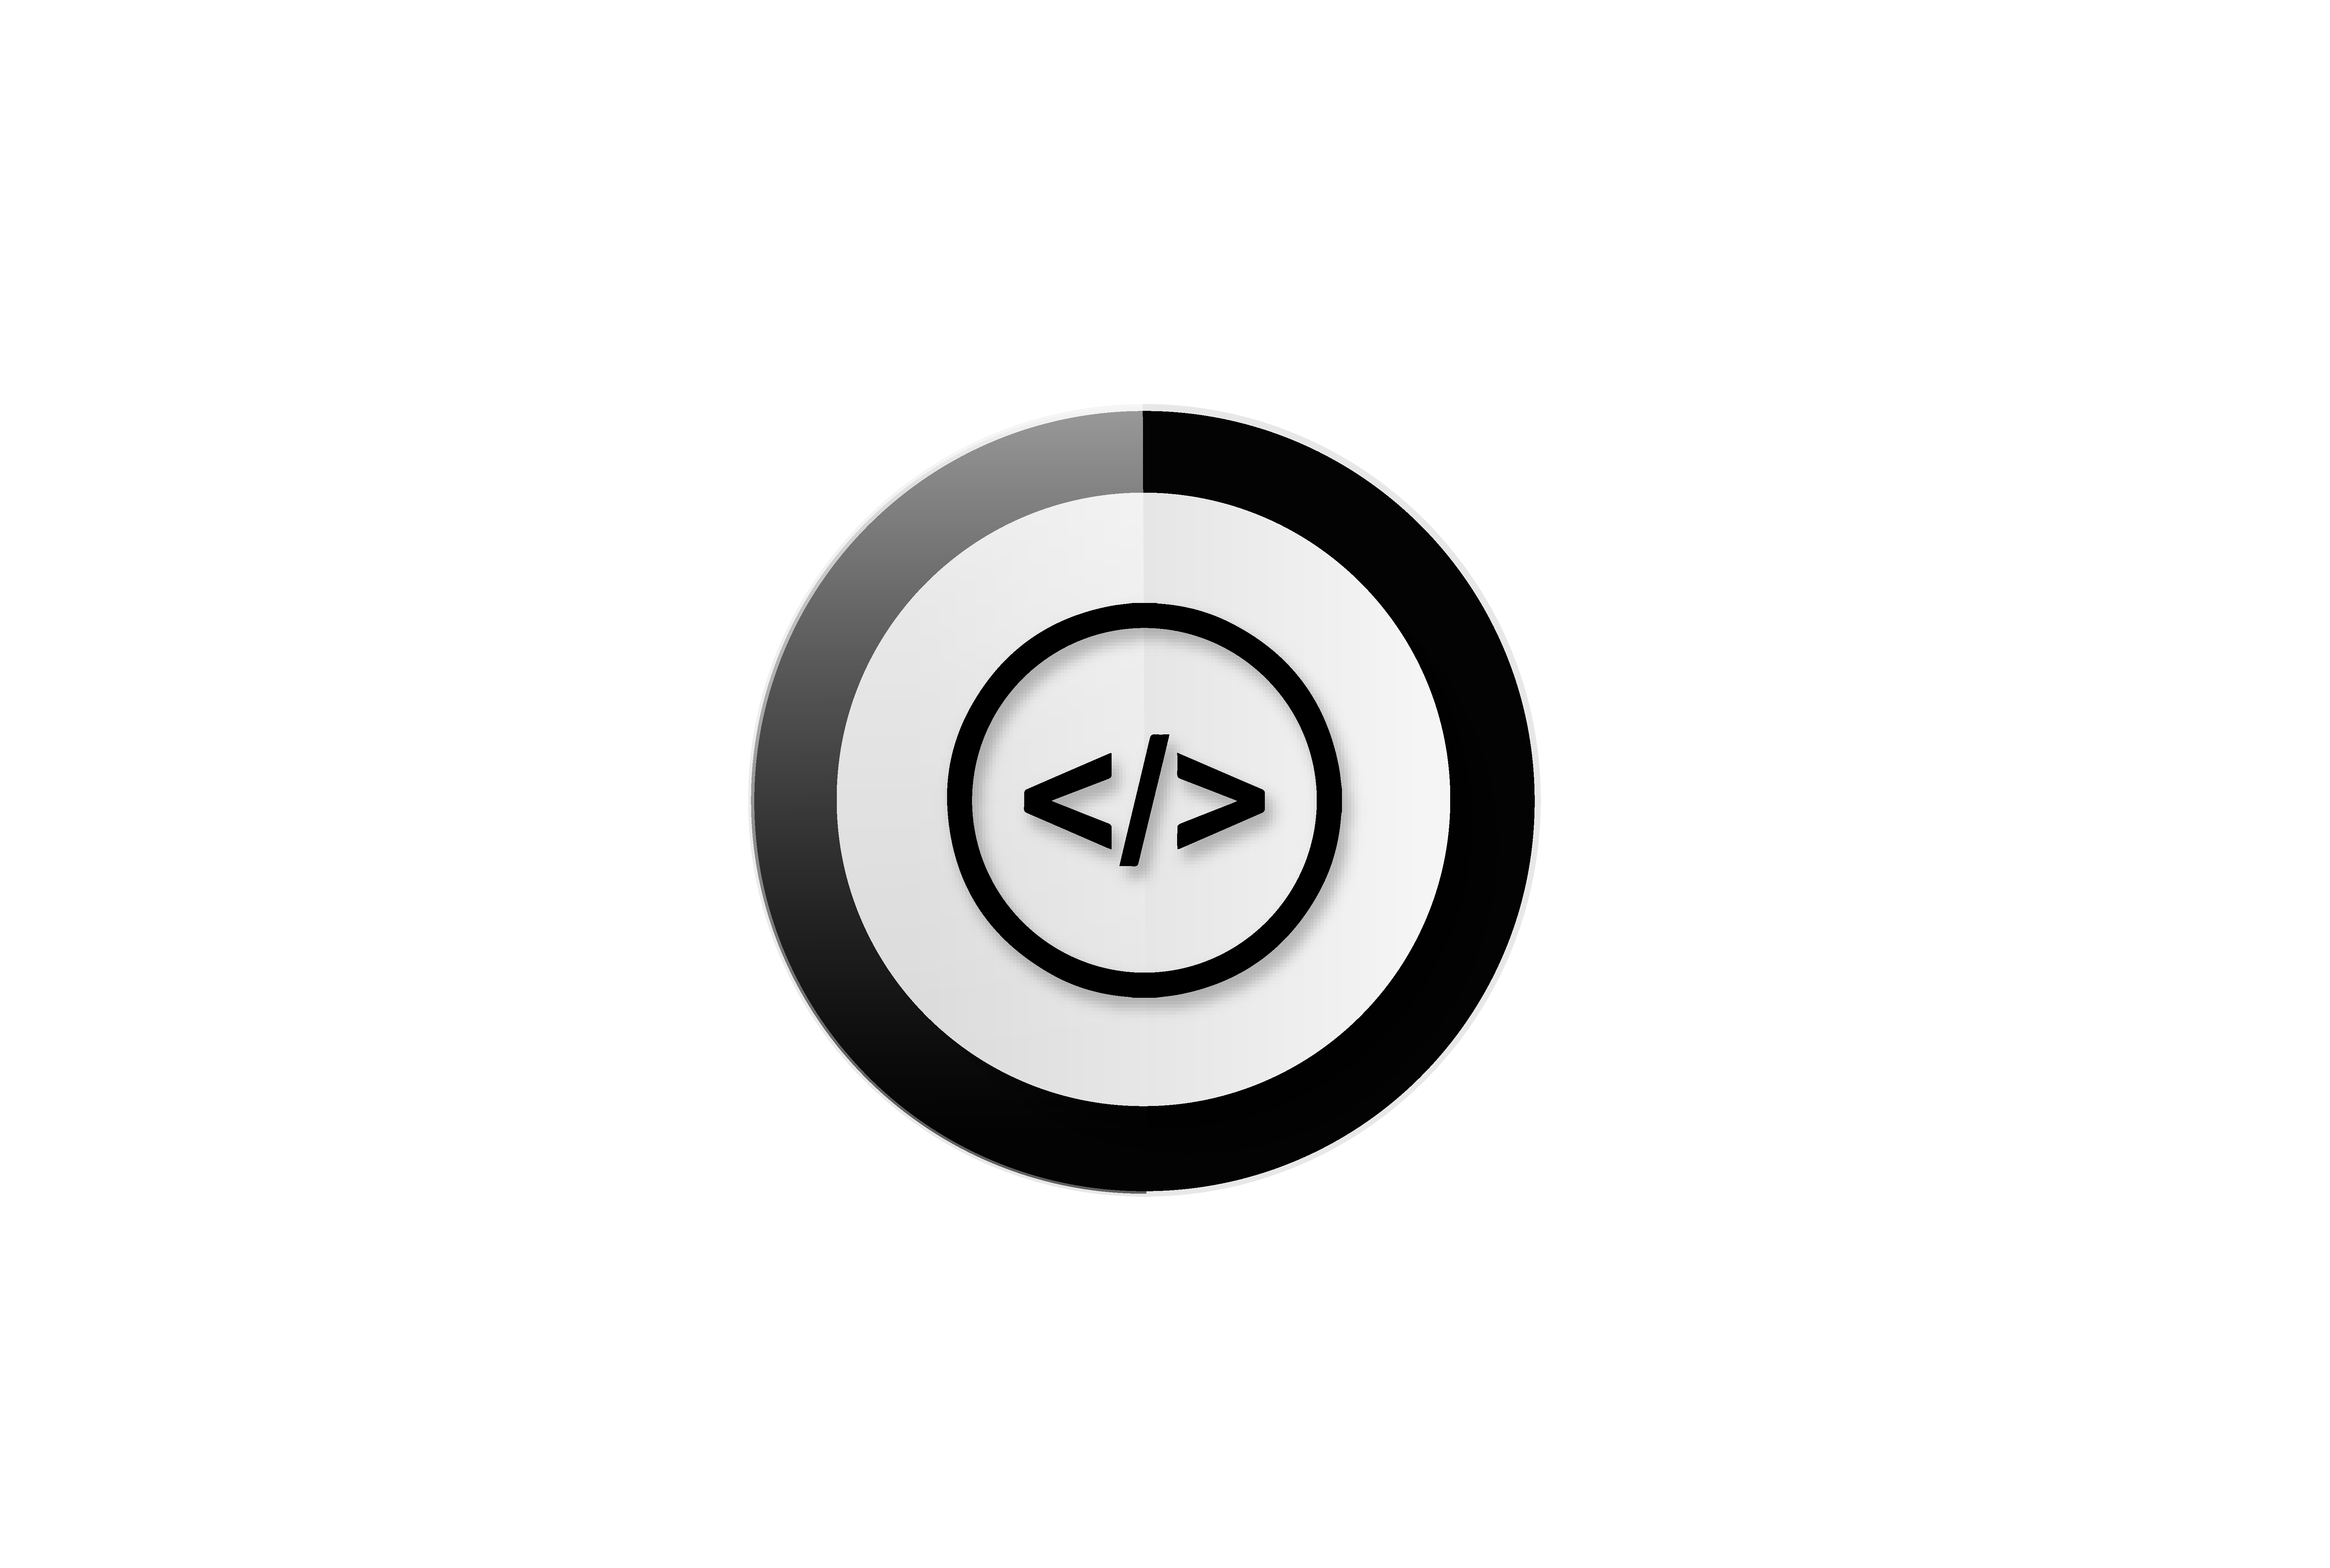 A black and white button with an arrow in it.